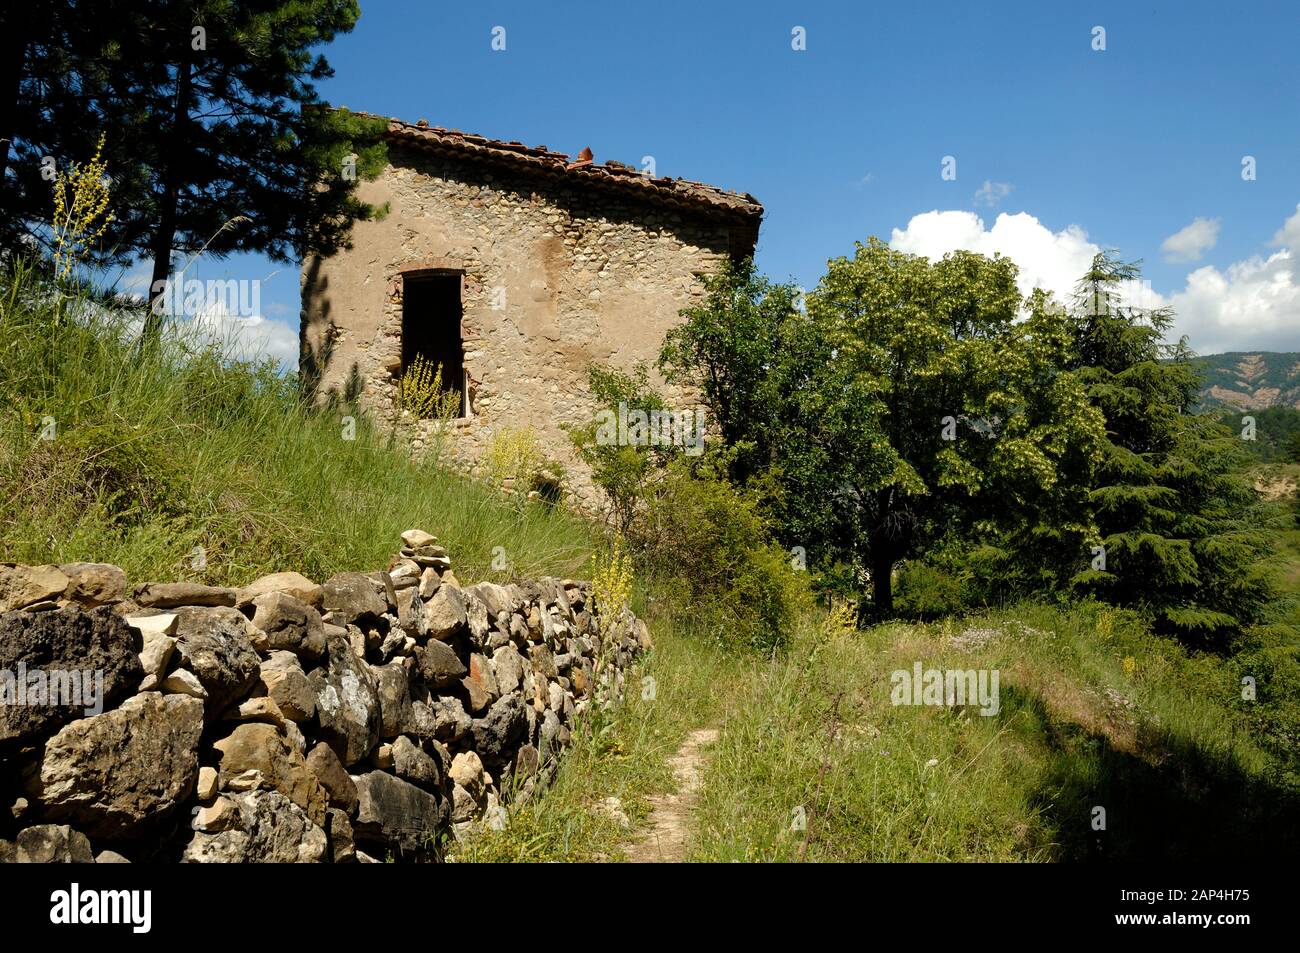 Abandoned Village or Ruined Village of Saint Symphorien in the Alpes-de-Haute-Provence Provence France Stock Photo